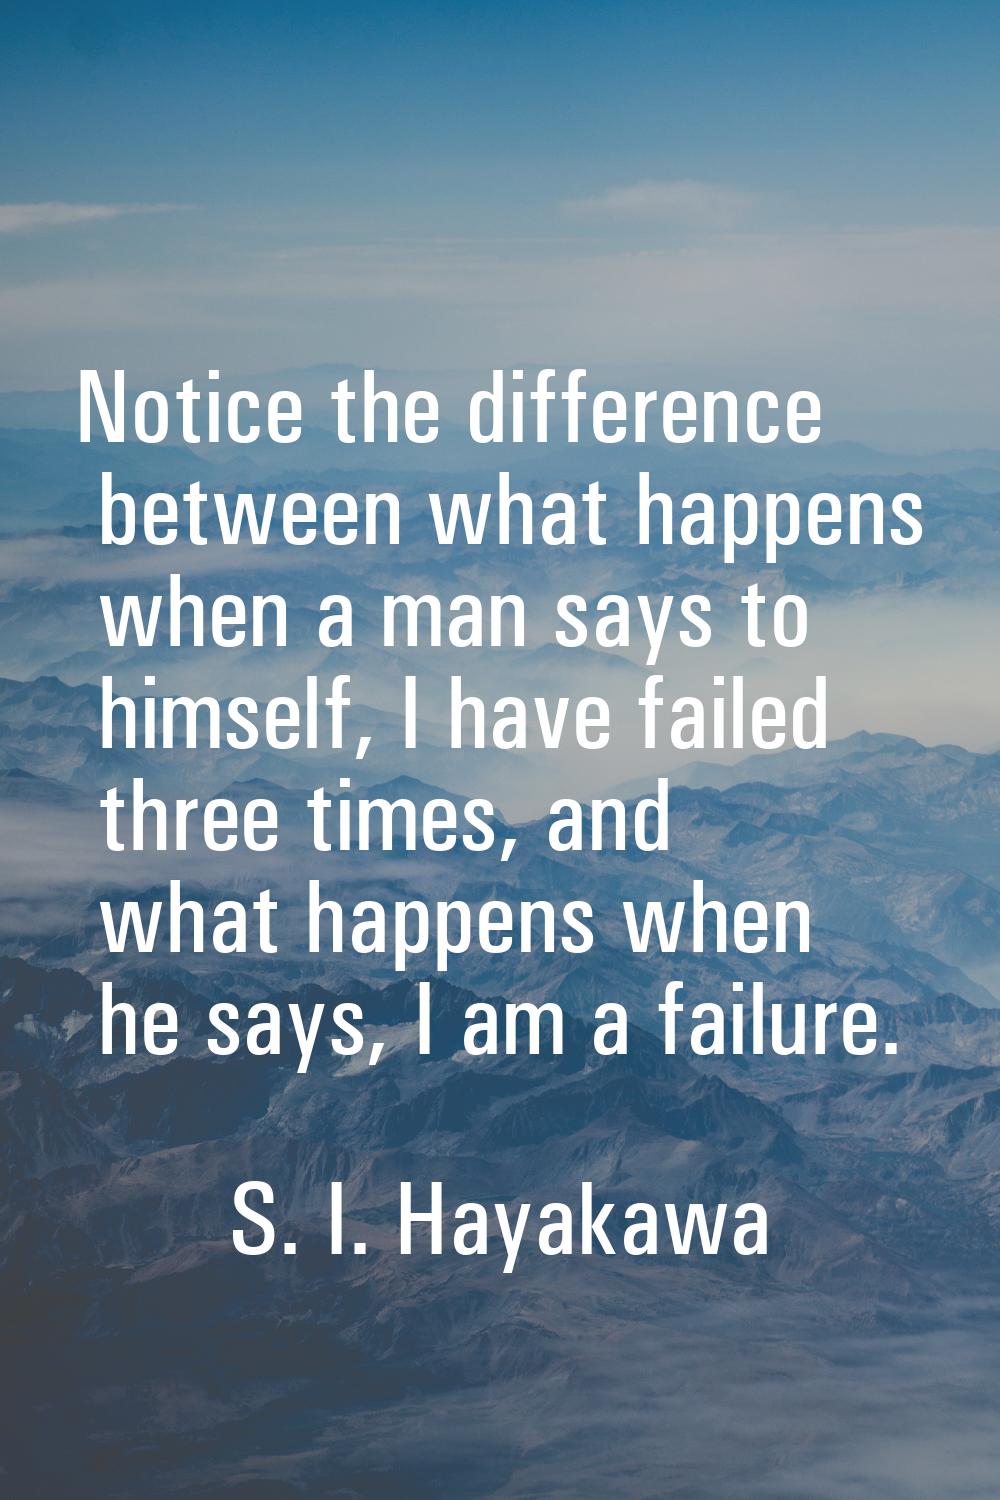 Notice the difference between what happens when a man says to himself, I have failed three times, a